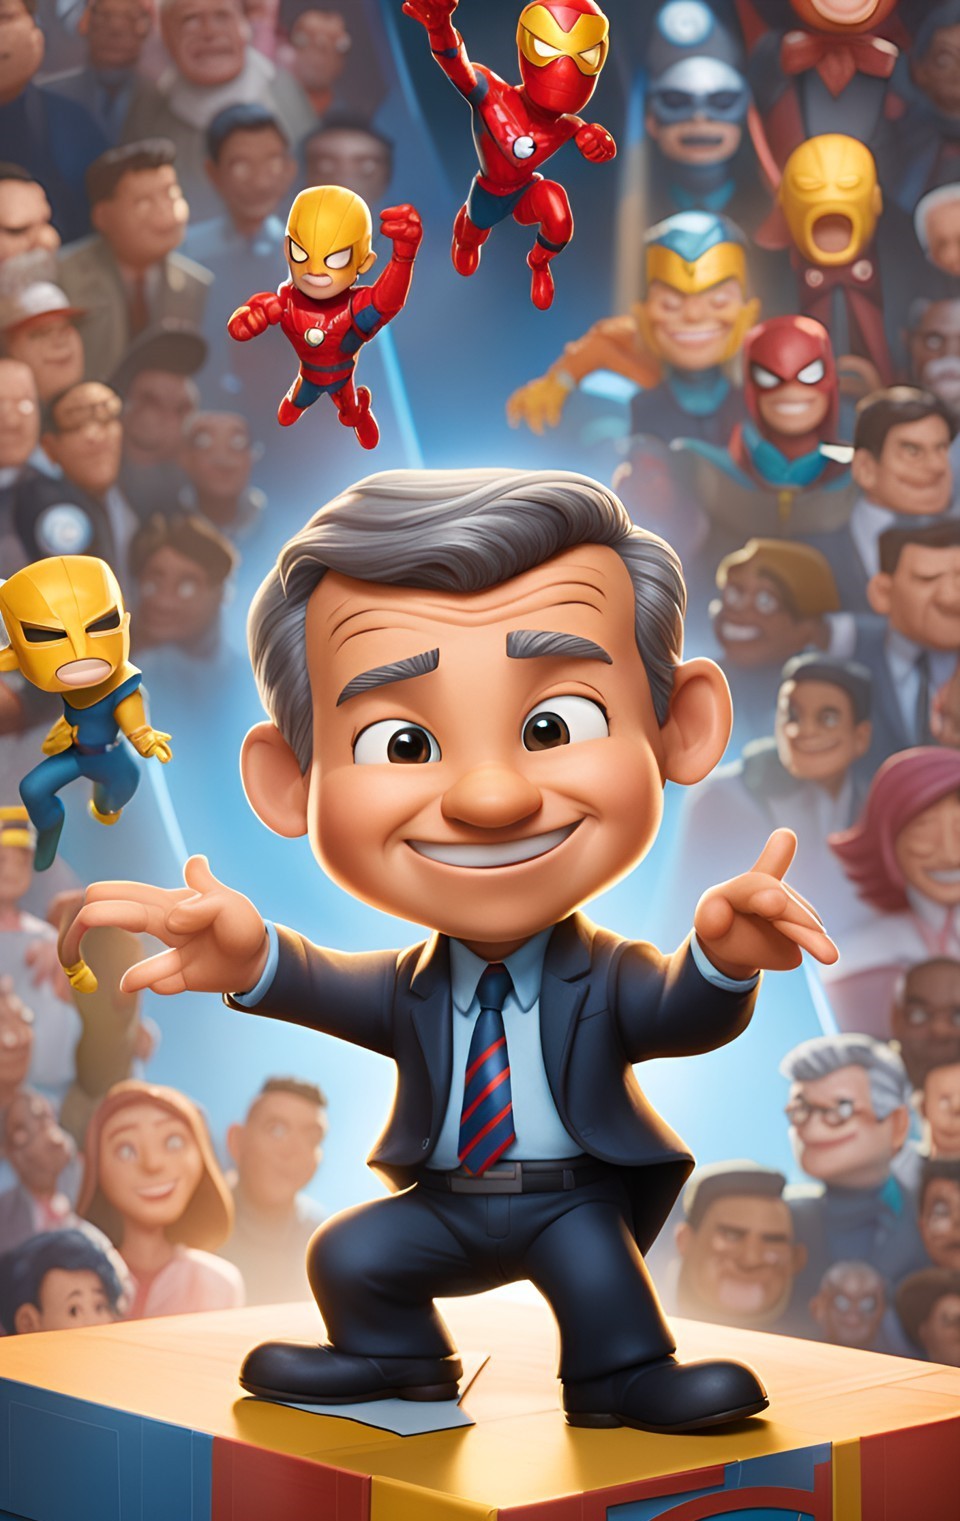 Bob Iger hilariously explains flop of The Marvels at box office